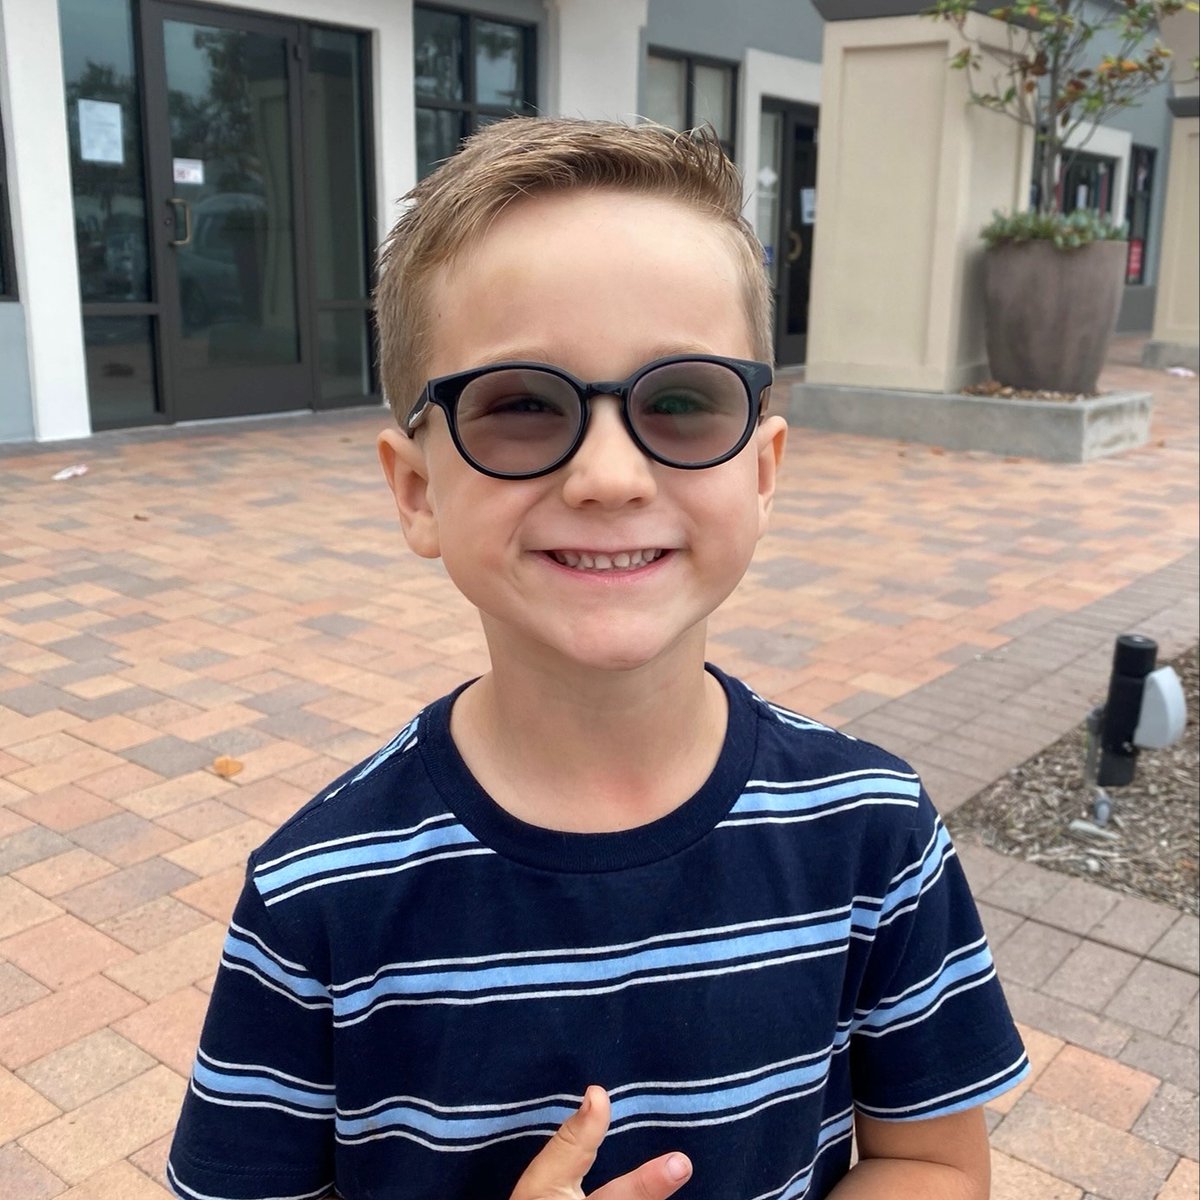 Meet Clark Taylor, one of our #PCRFKids! When Clark was 2 years old, he was diagnosed with retinoblastoma - a rare eye cancer. Because he participated in a double-blind study during treatment, physicians today have finer treatment plans for his tumor type! 🎗️